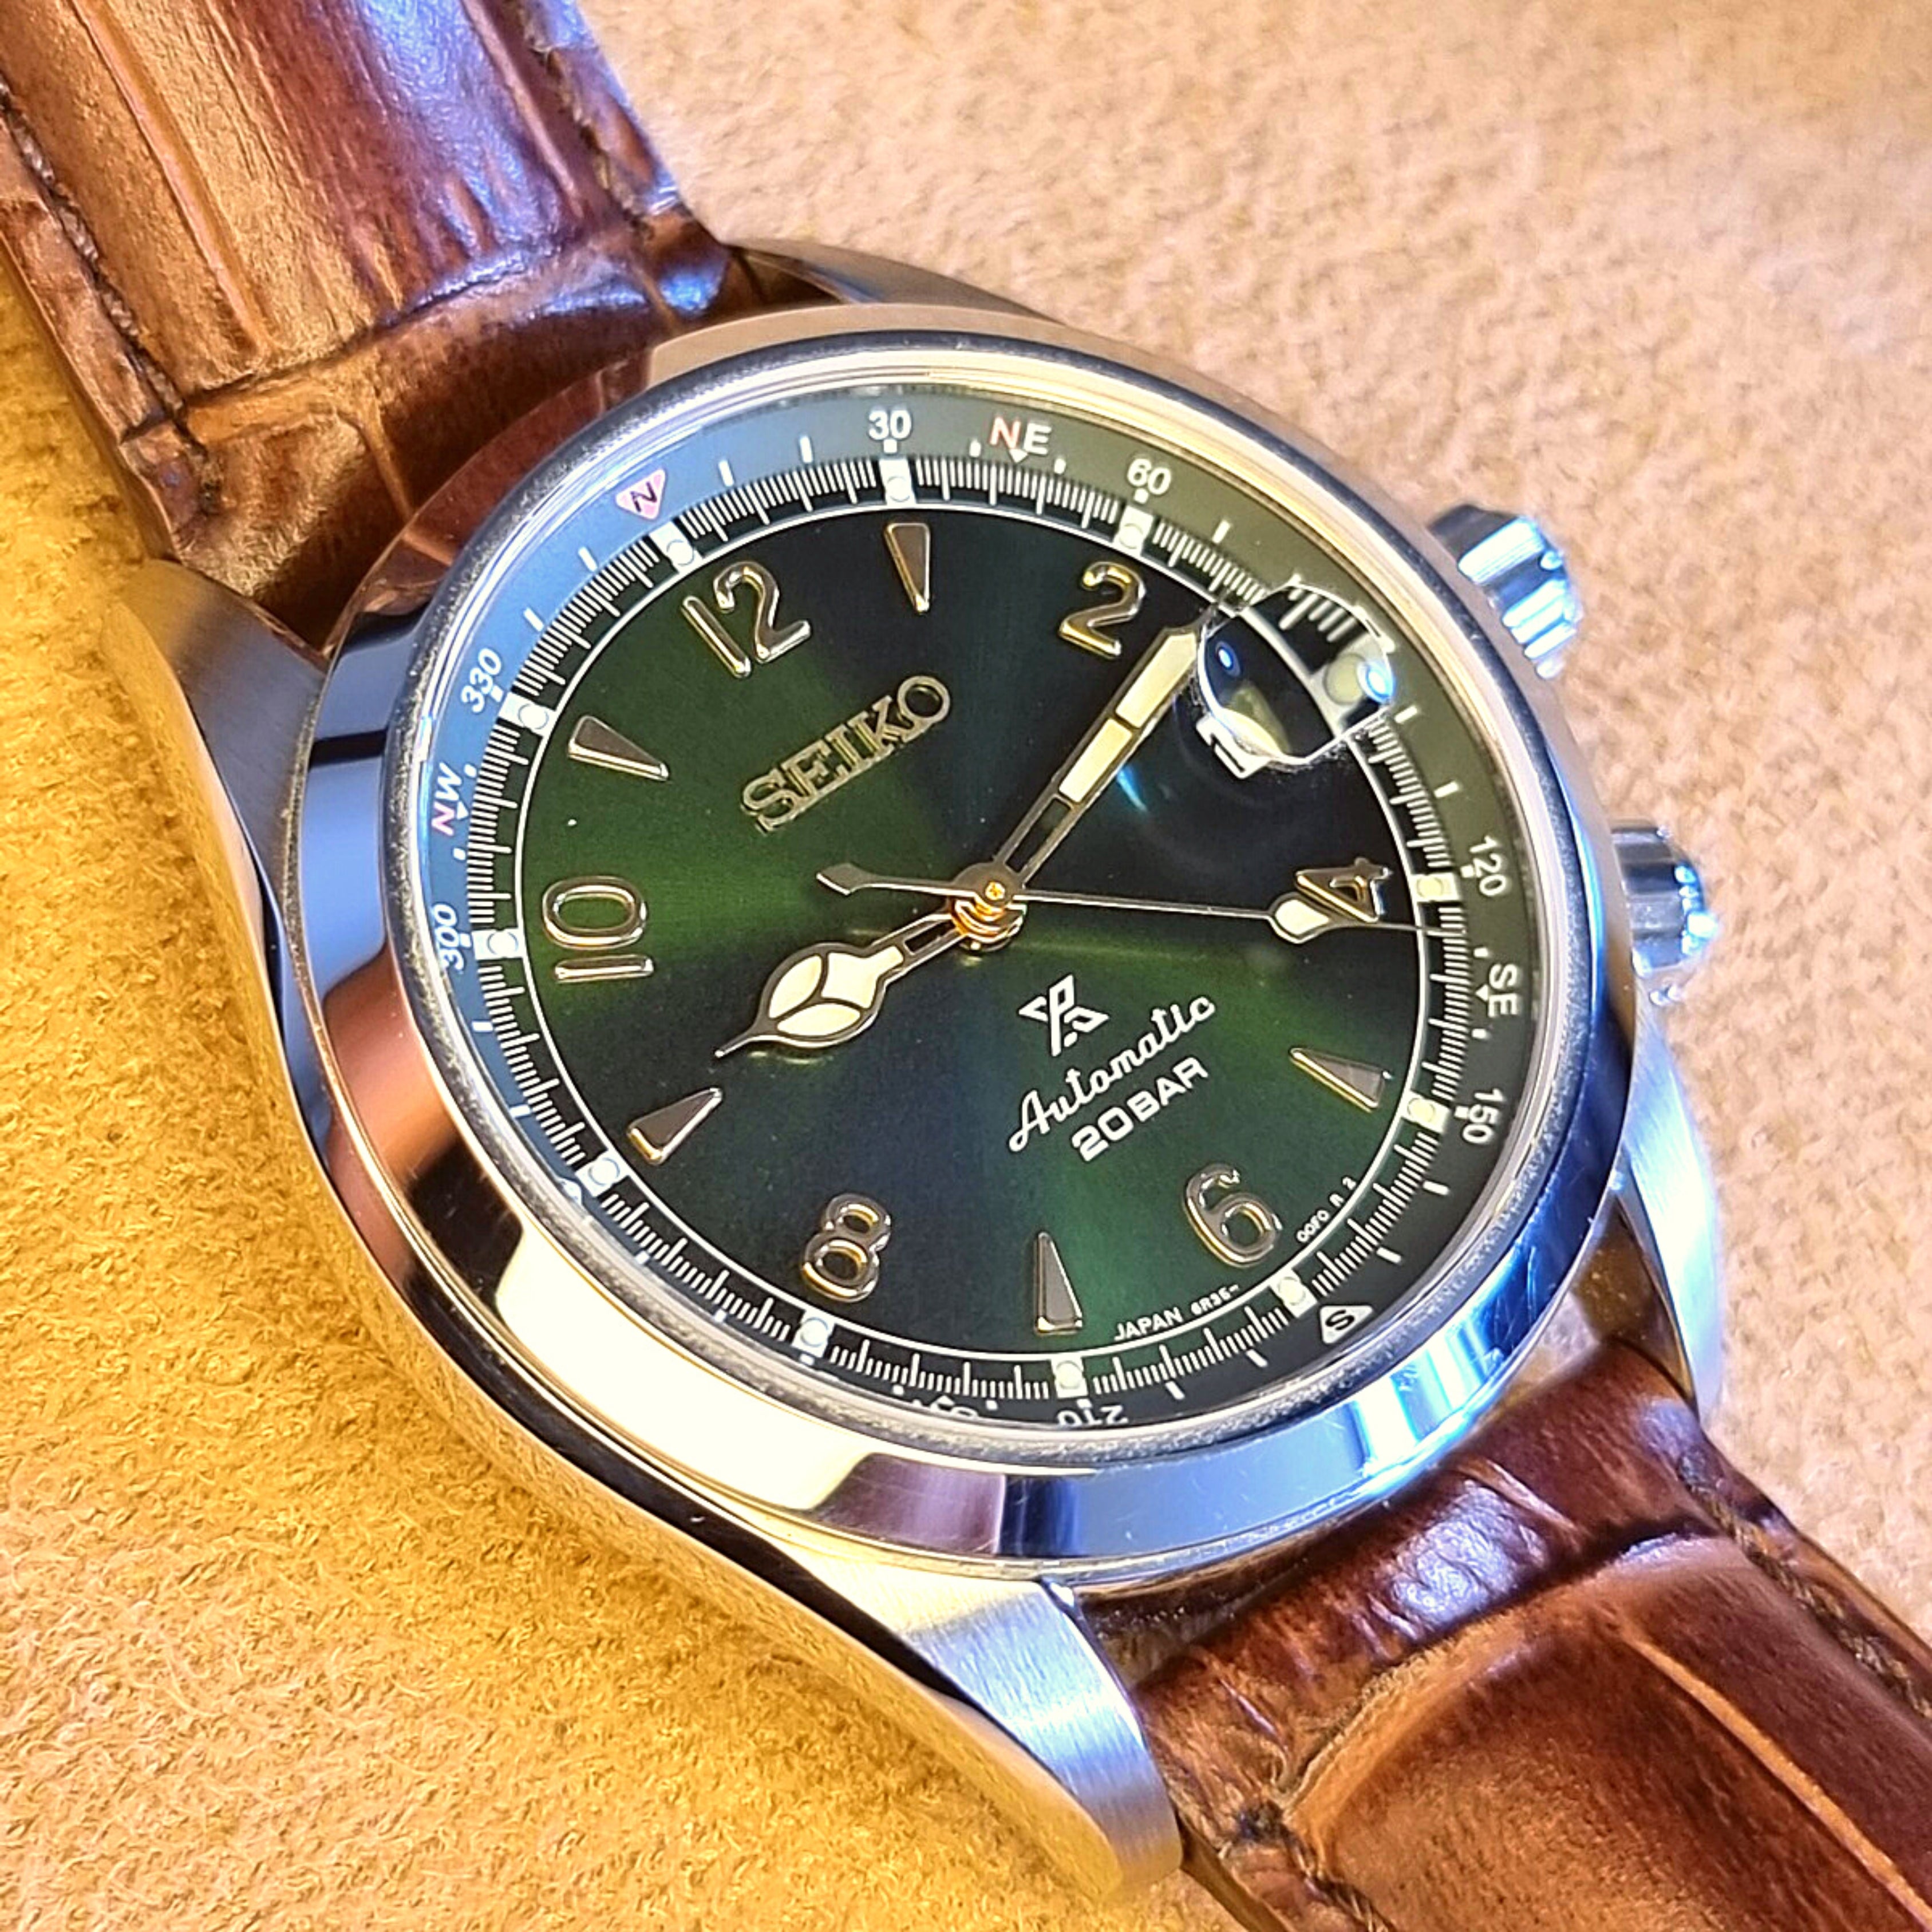 The SB121 Green Alpinist - An owner's perspective – speaking of watches